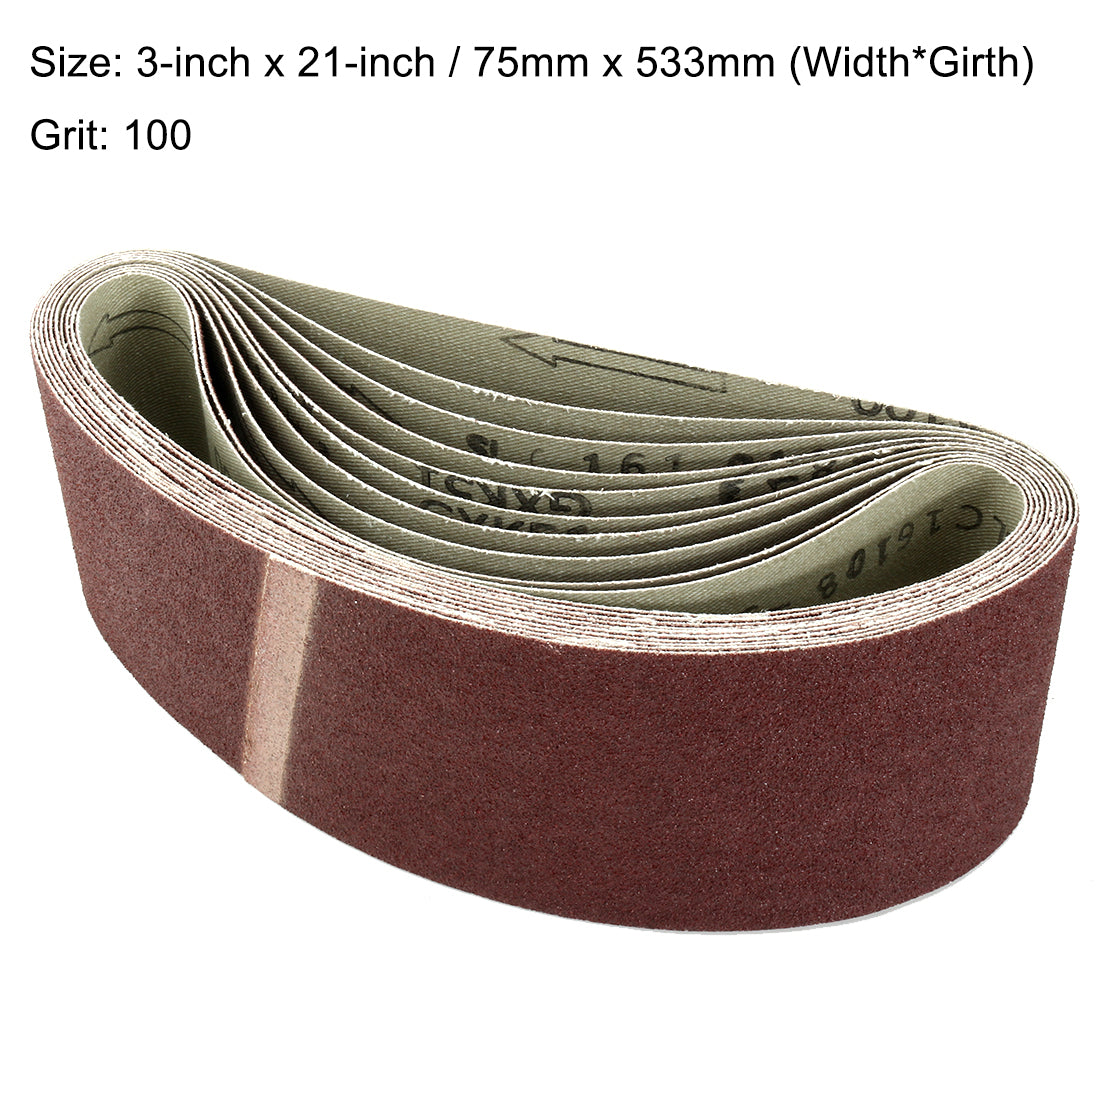 uxcell Uxcell 3-Inch x 21-Inch Aluminum Oxide Sanding Belt 100 Grits Lapped Joint 10pcs